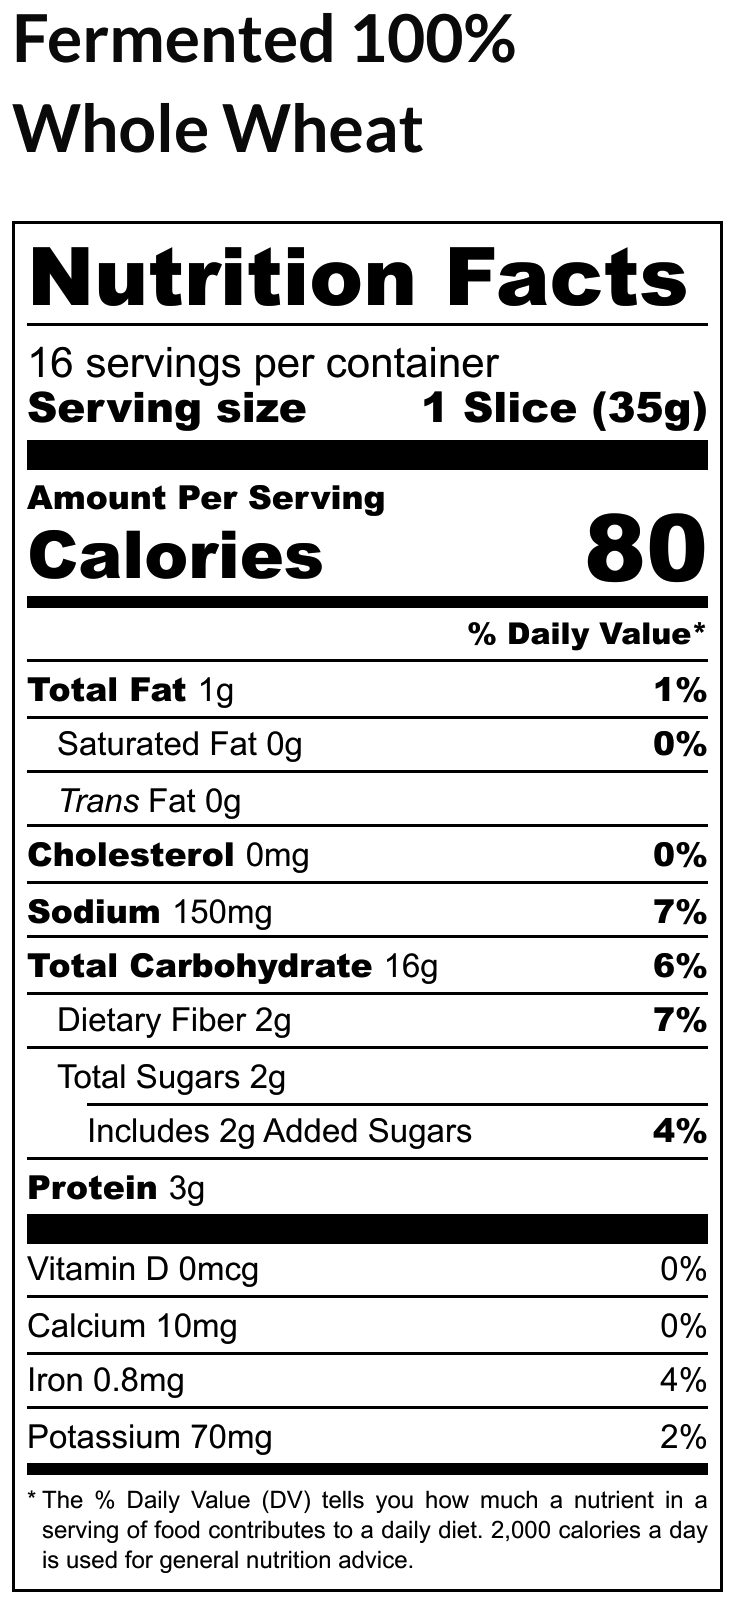 Fermented 100% Whole Wheat - Nutrition Label.png